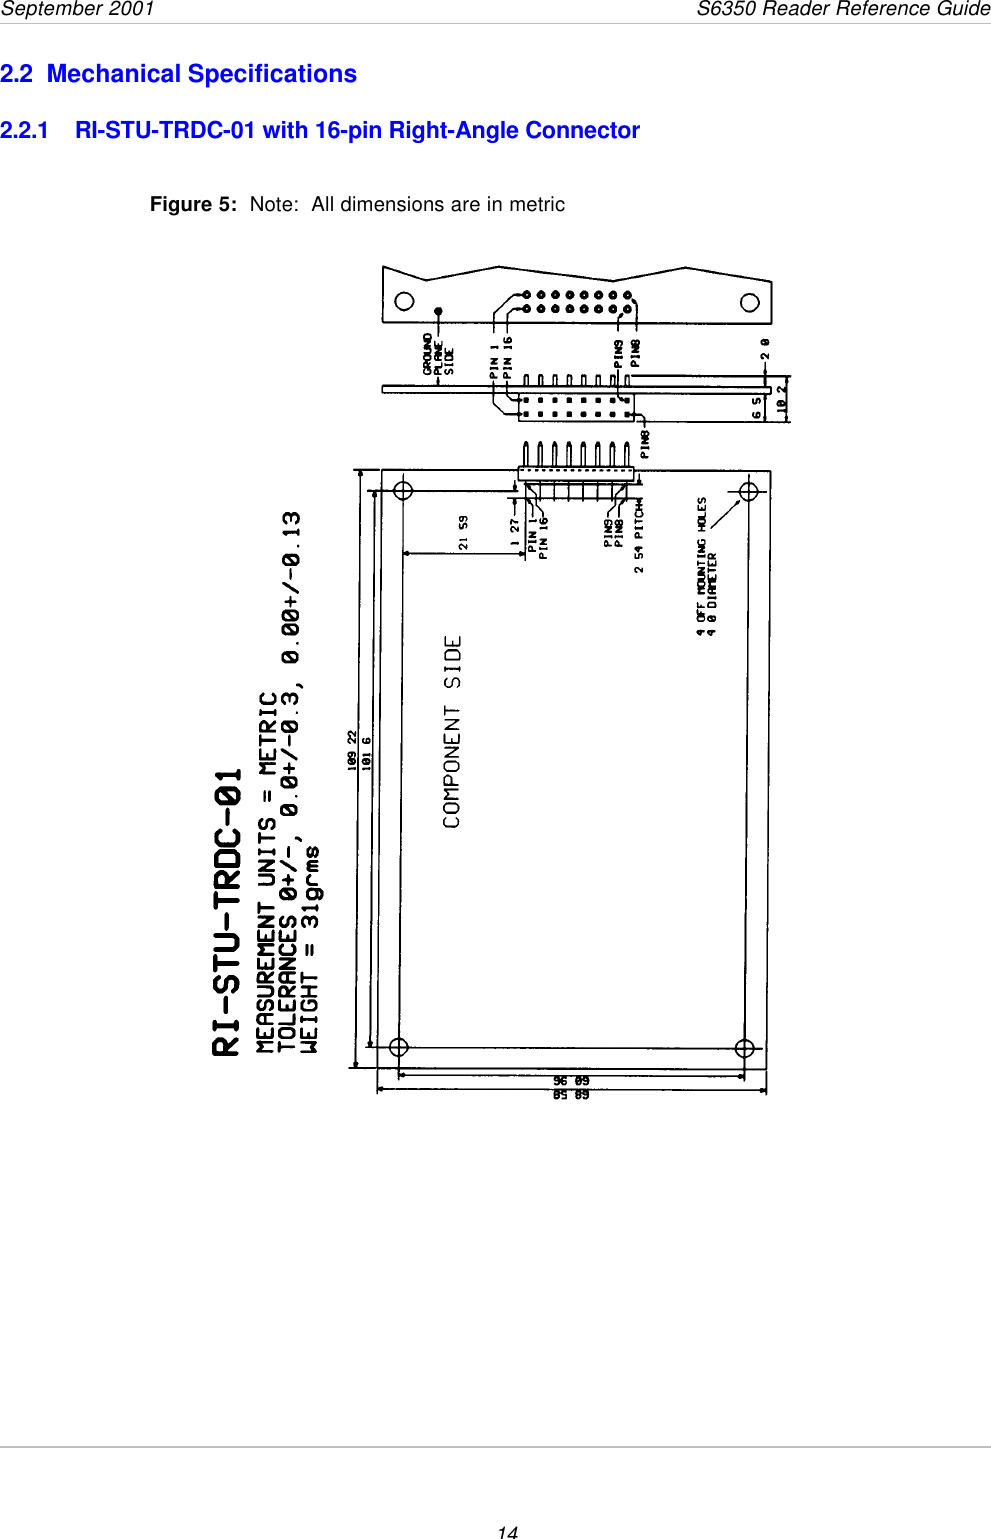 September 2001                 S6350 Reader Reference Guide142.2 Mechanical Specifications2.2.1 RI-STU-TRDC-01 with 16-pin Right-Angle ConnectorFigure 5:  Note:  All dimensions are in metric